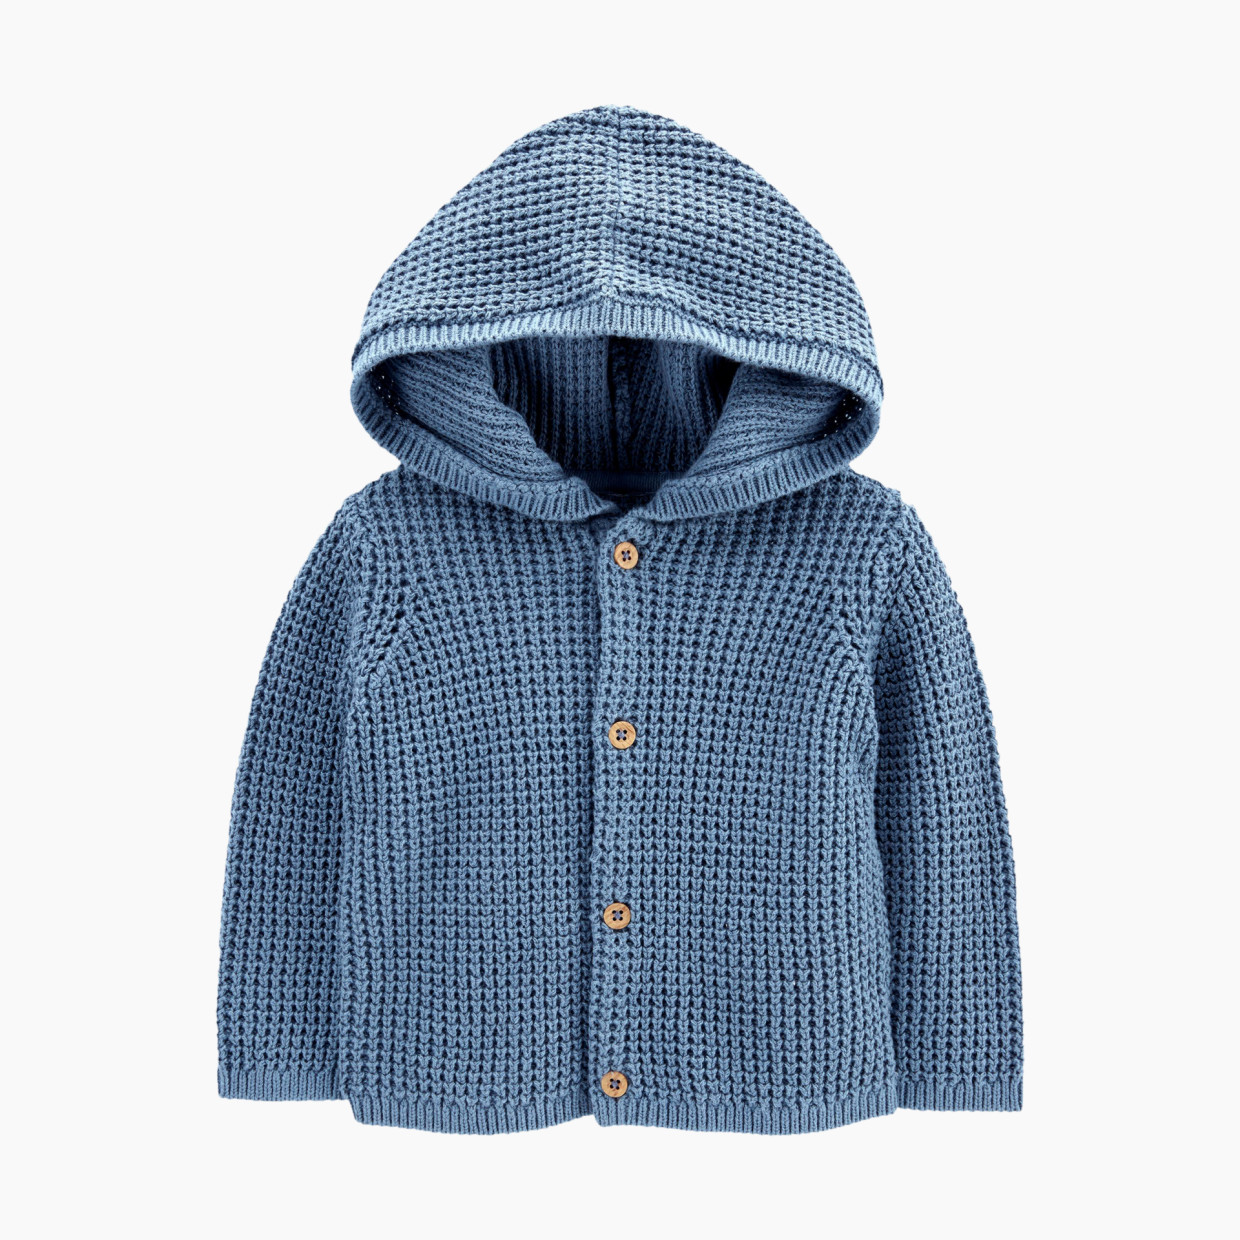 Carter's Hooded Cotton Cardigan - Blue, 6 M.